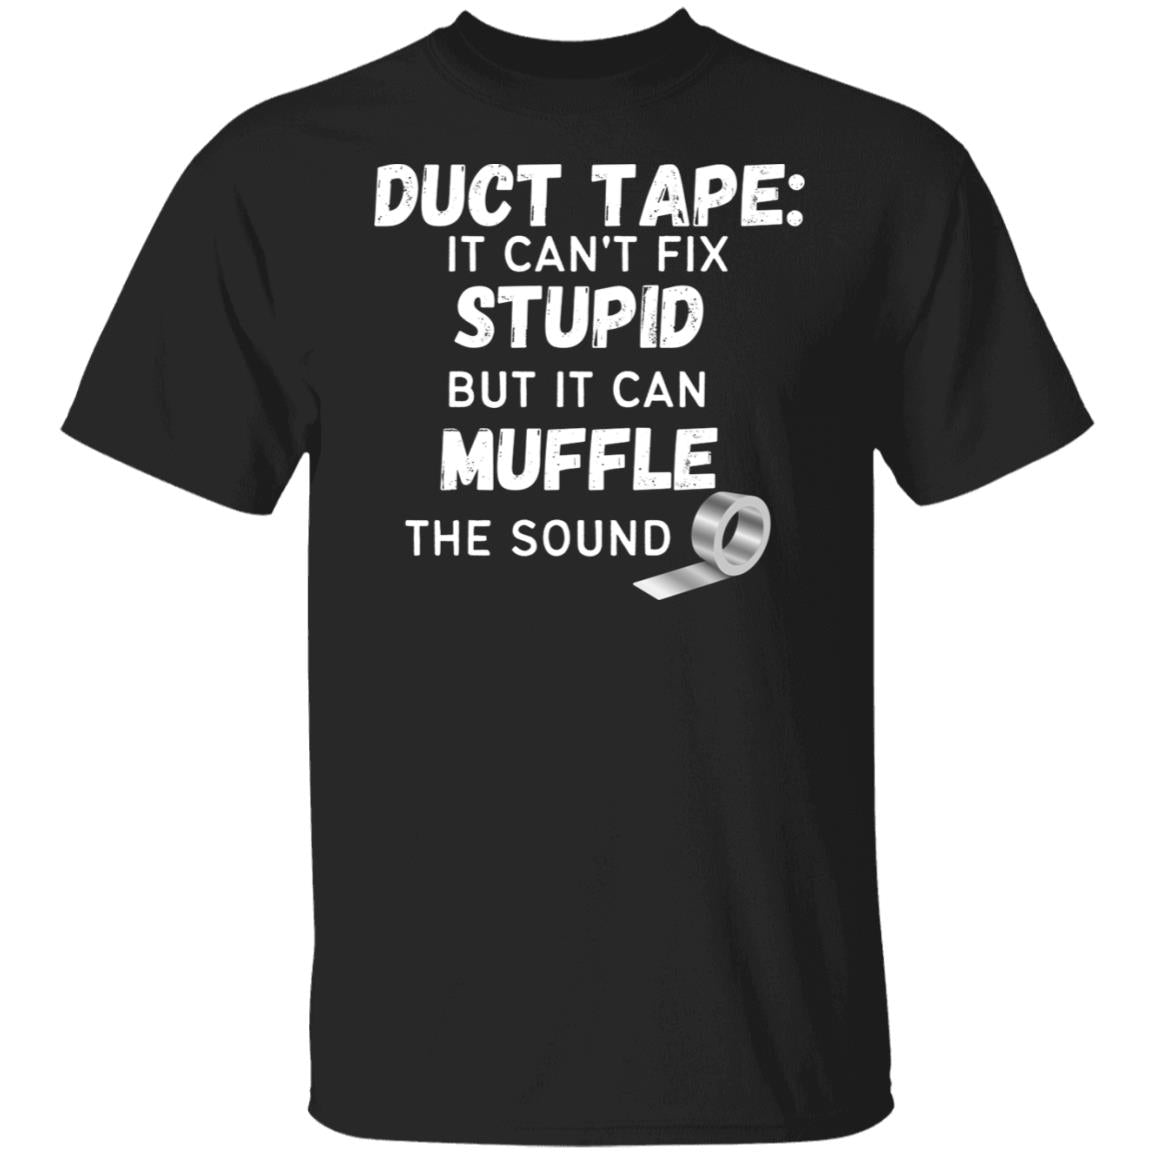 Duct Tape Can't Fix Stupid Sarcastic Humor Funny Graphic Tee Offensive T-Shirt